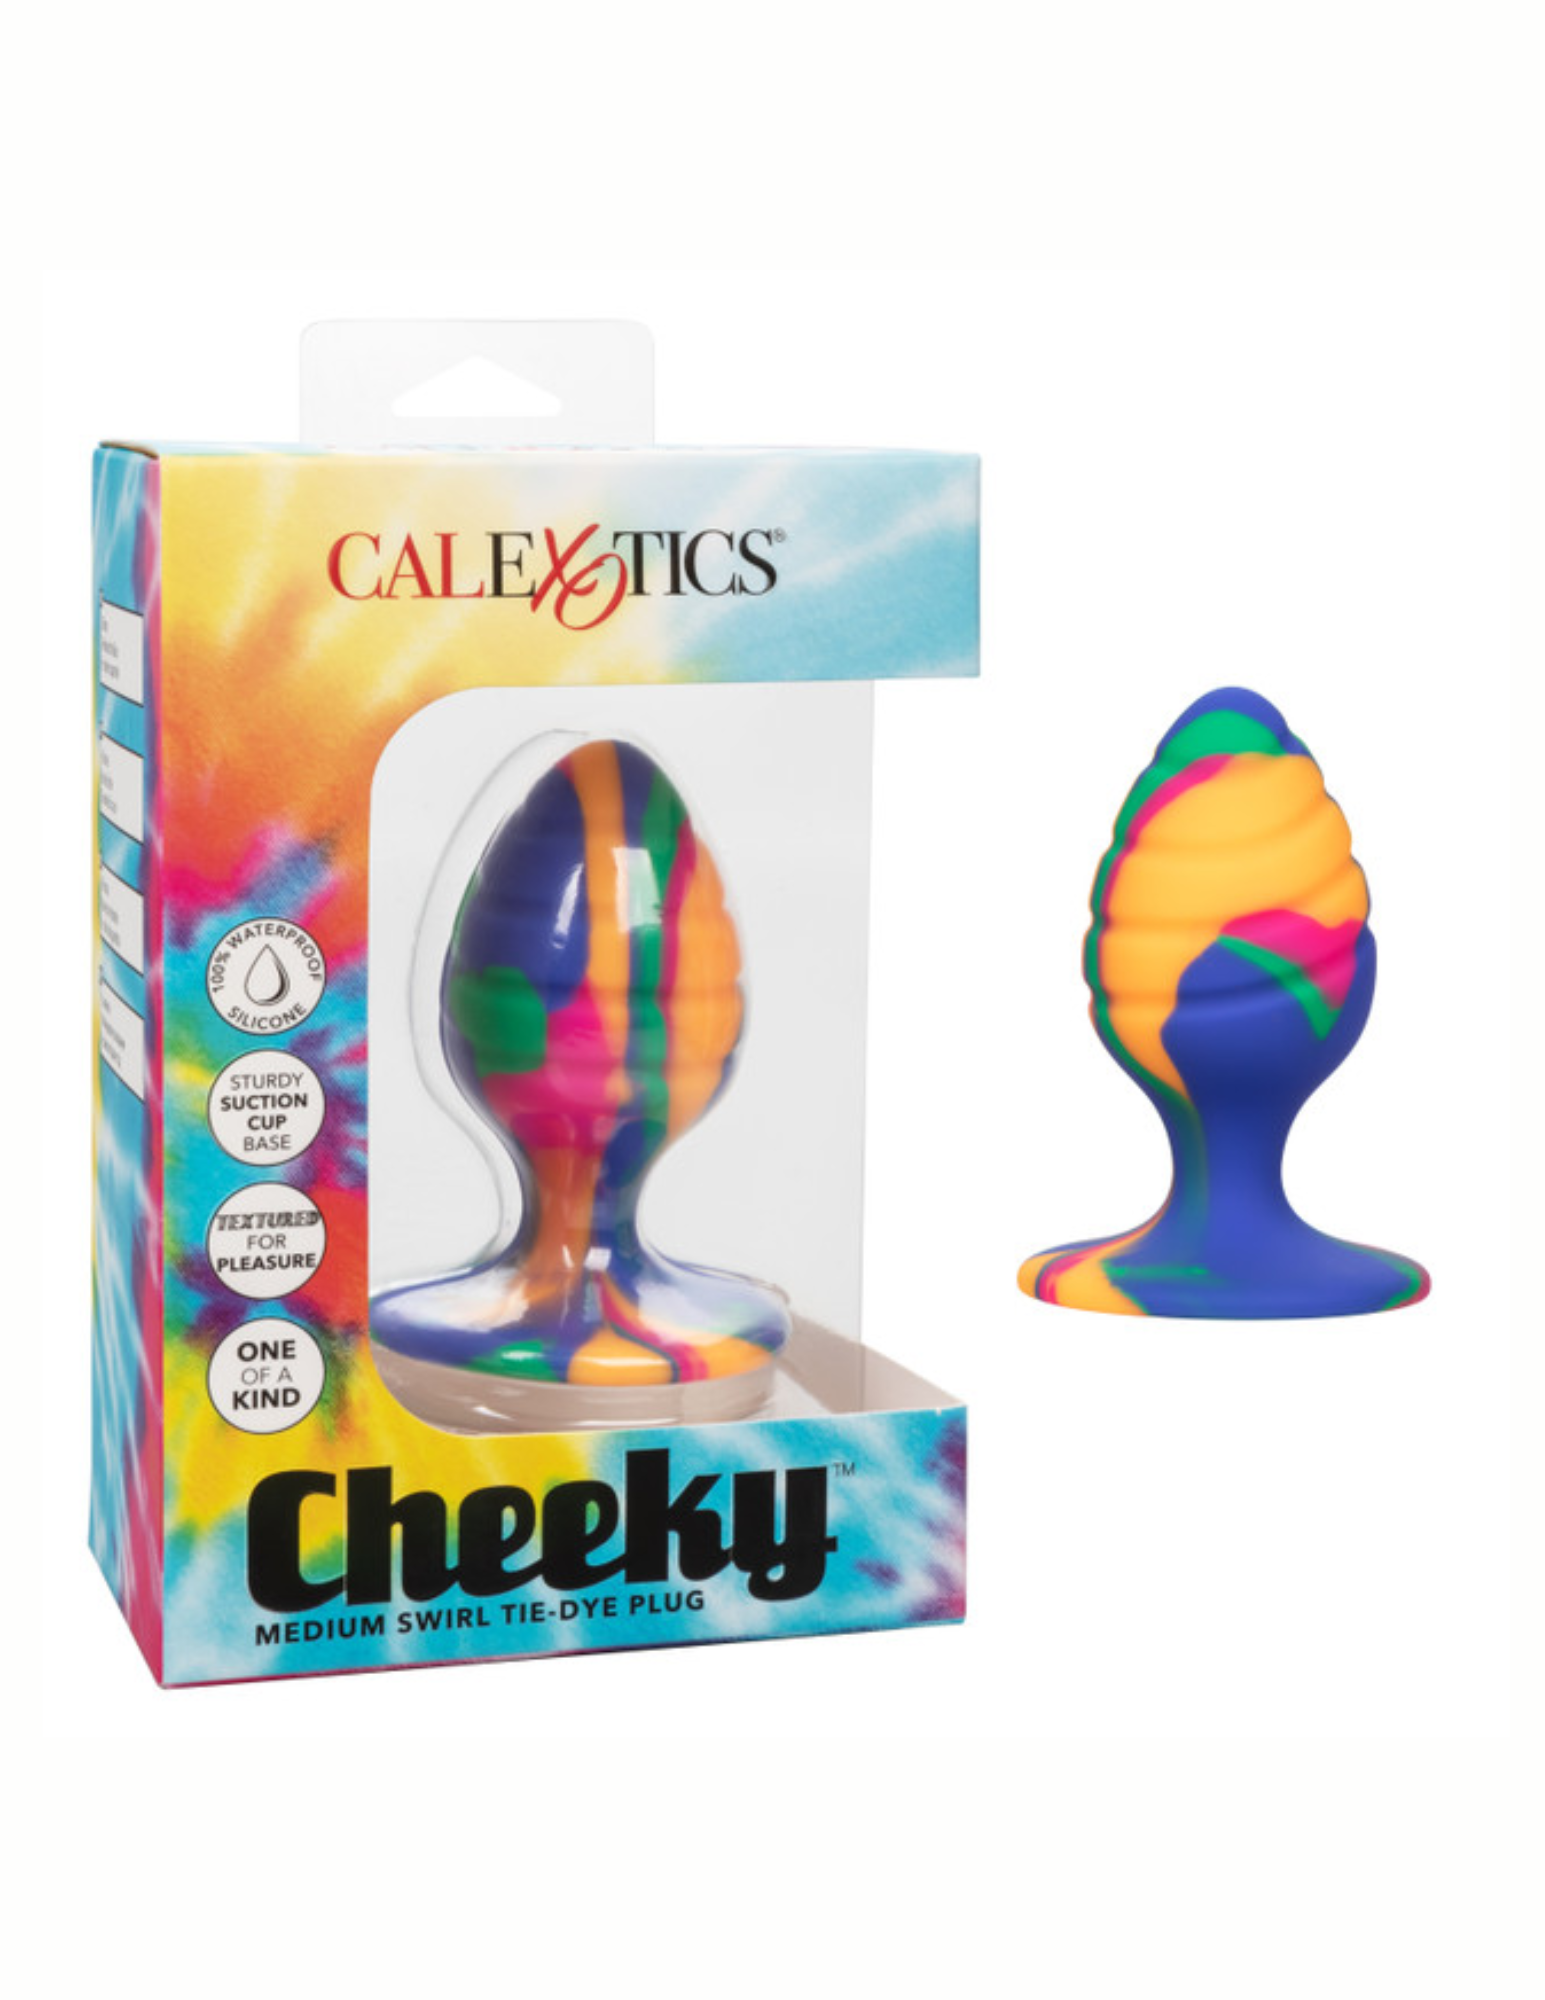 Photo shows the Cheeky Swirl Tie Dye Silicone Plug, from CalExotics (medium), next to its box.